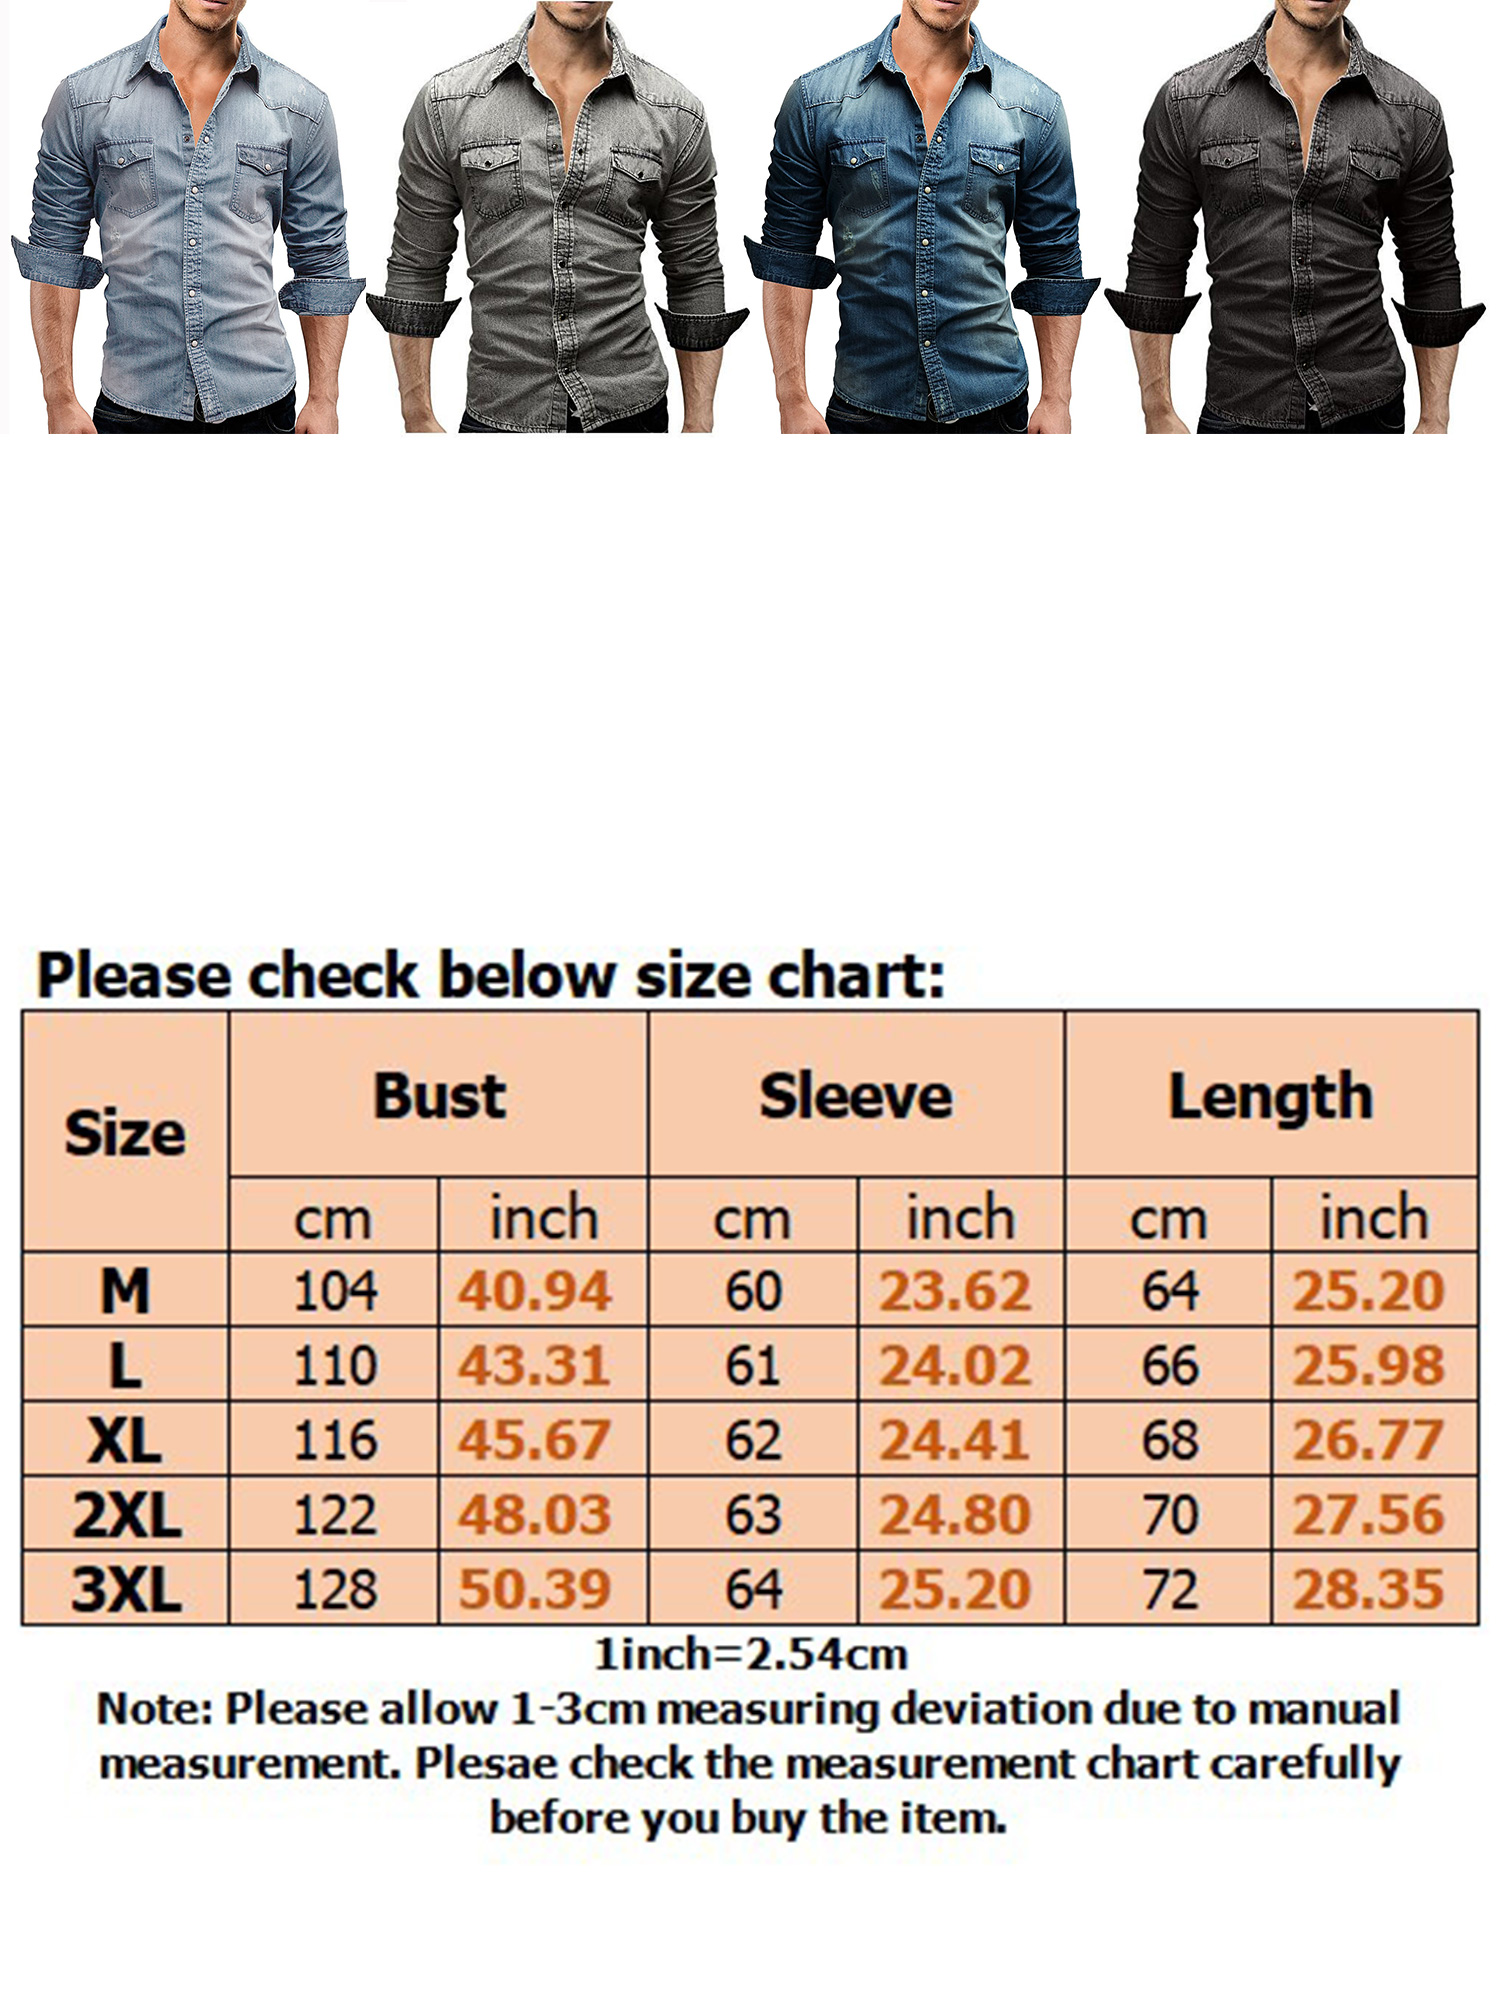 Men's Western Long Sleeve Denim Shirt with Pockets Casual Slim Fit Lapel Tops Button Down Blouse for Winter - image 2 of 4